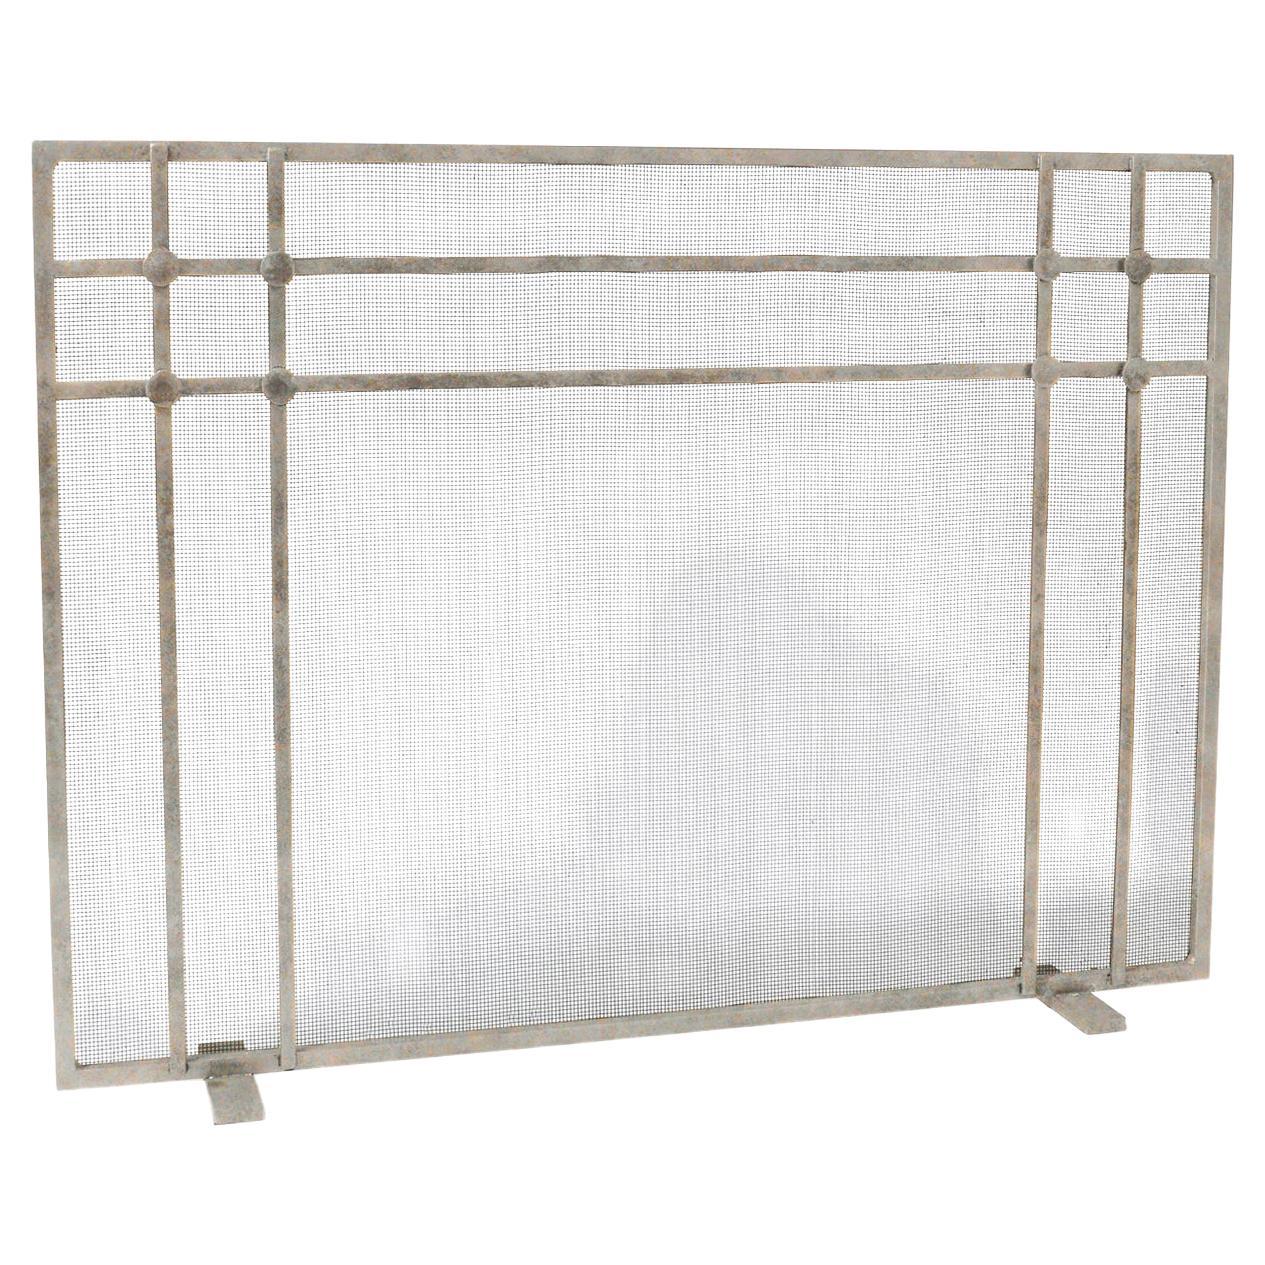 Henry Fireplace Screen in Aged Silver For Sale